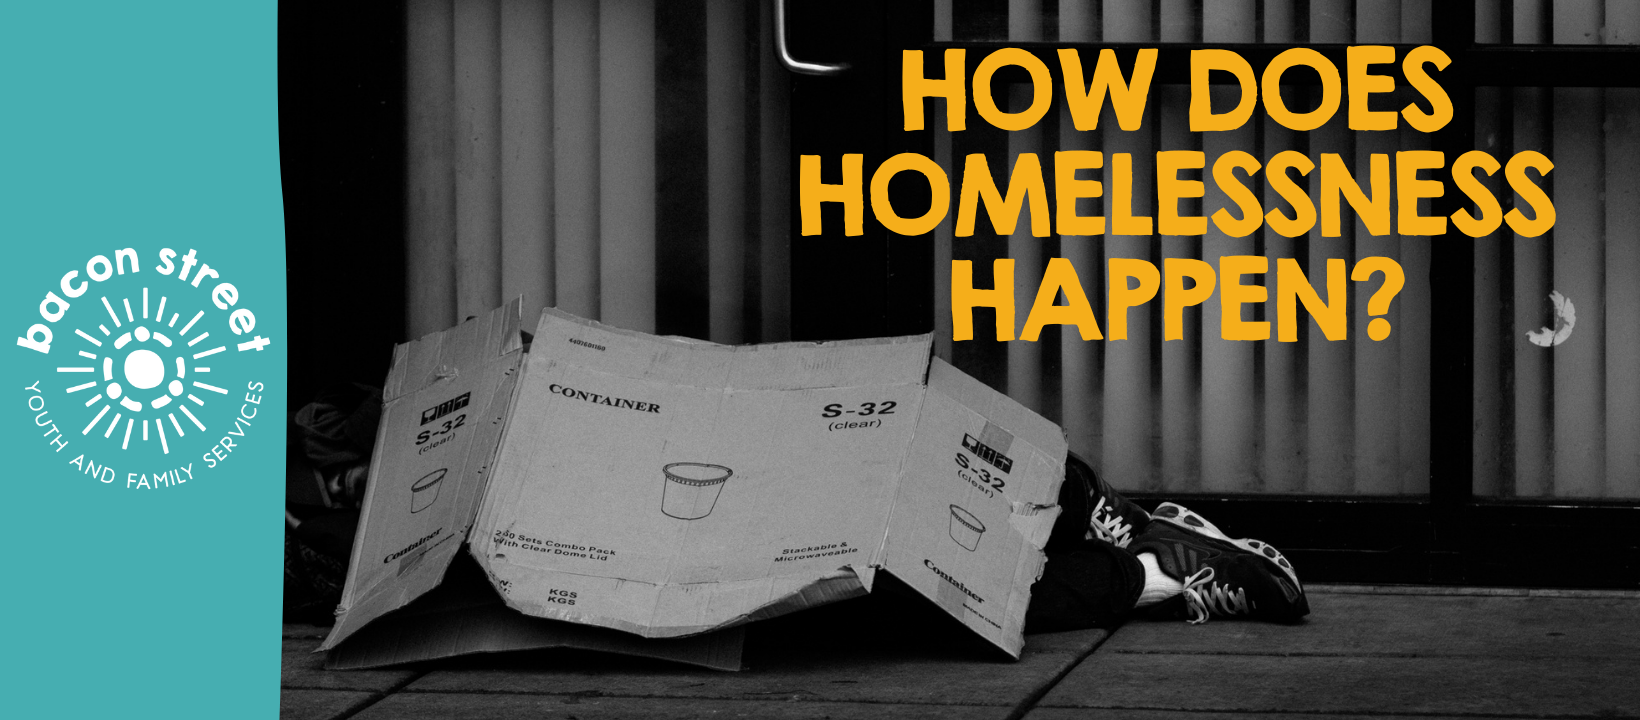 How does homelessness happen?